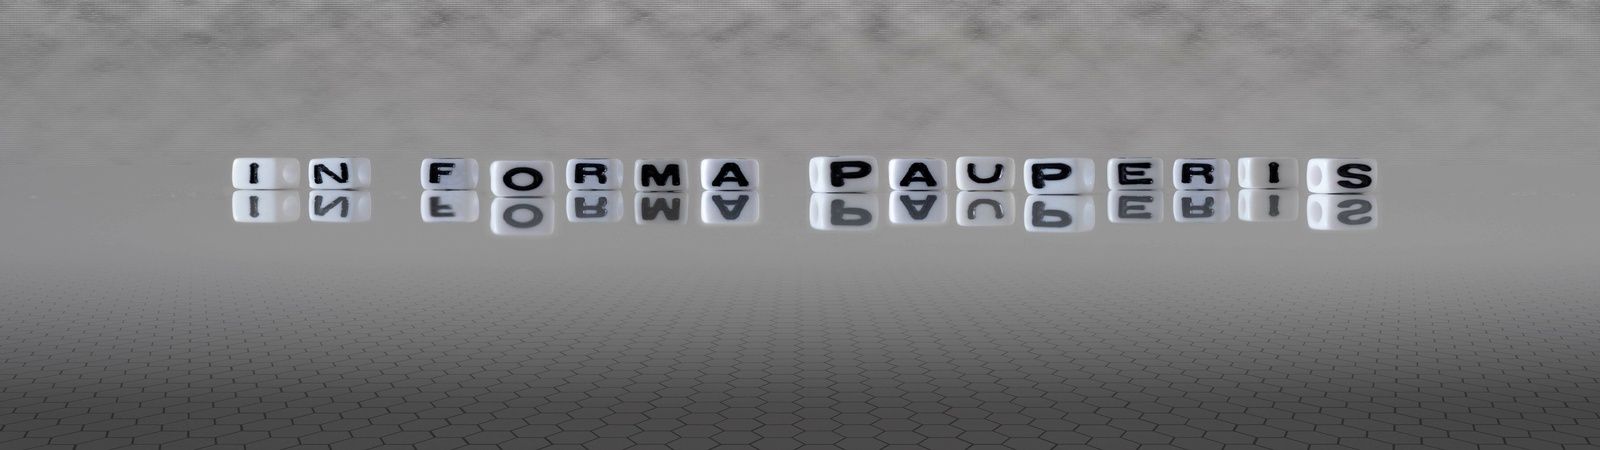 image of word in forma pauperis banner image